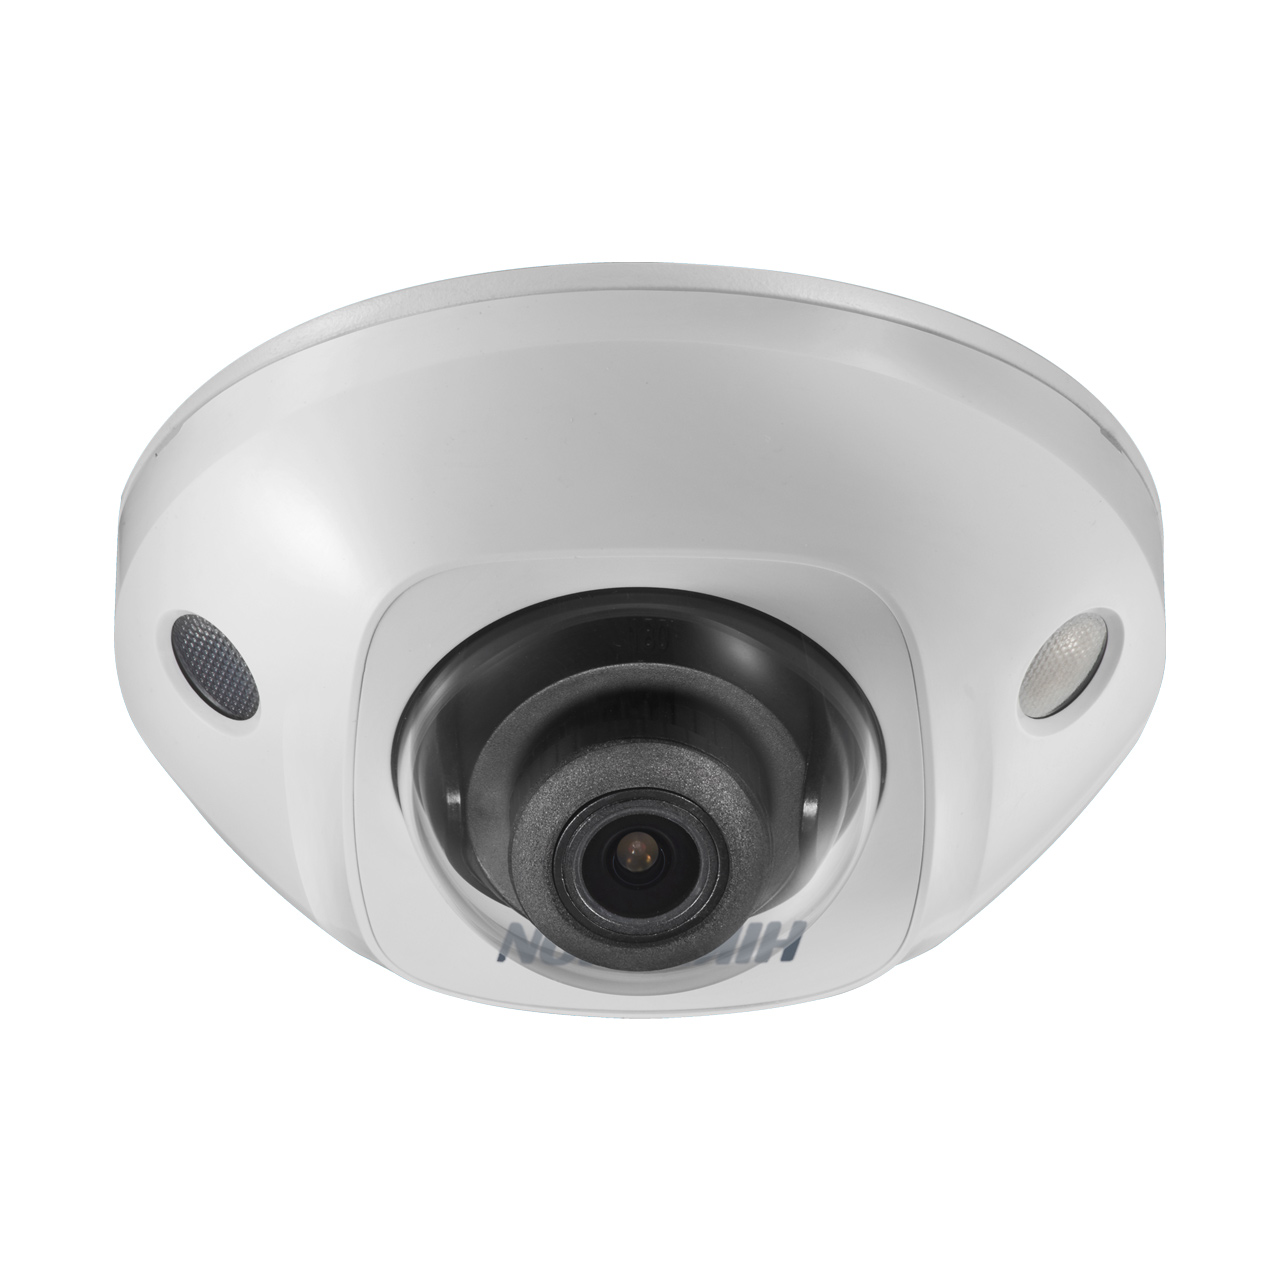 HIKVISION 6MP EXIR NETWORK Mini DOME CAMERA DS-2CD2563G0-IS